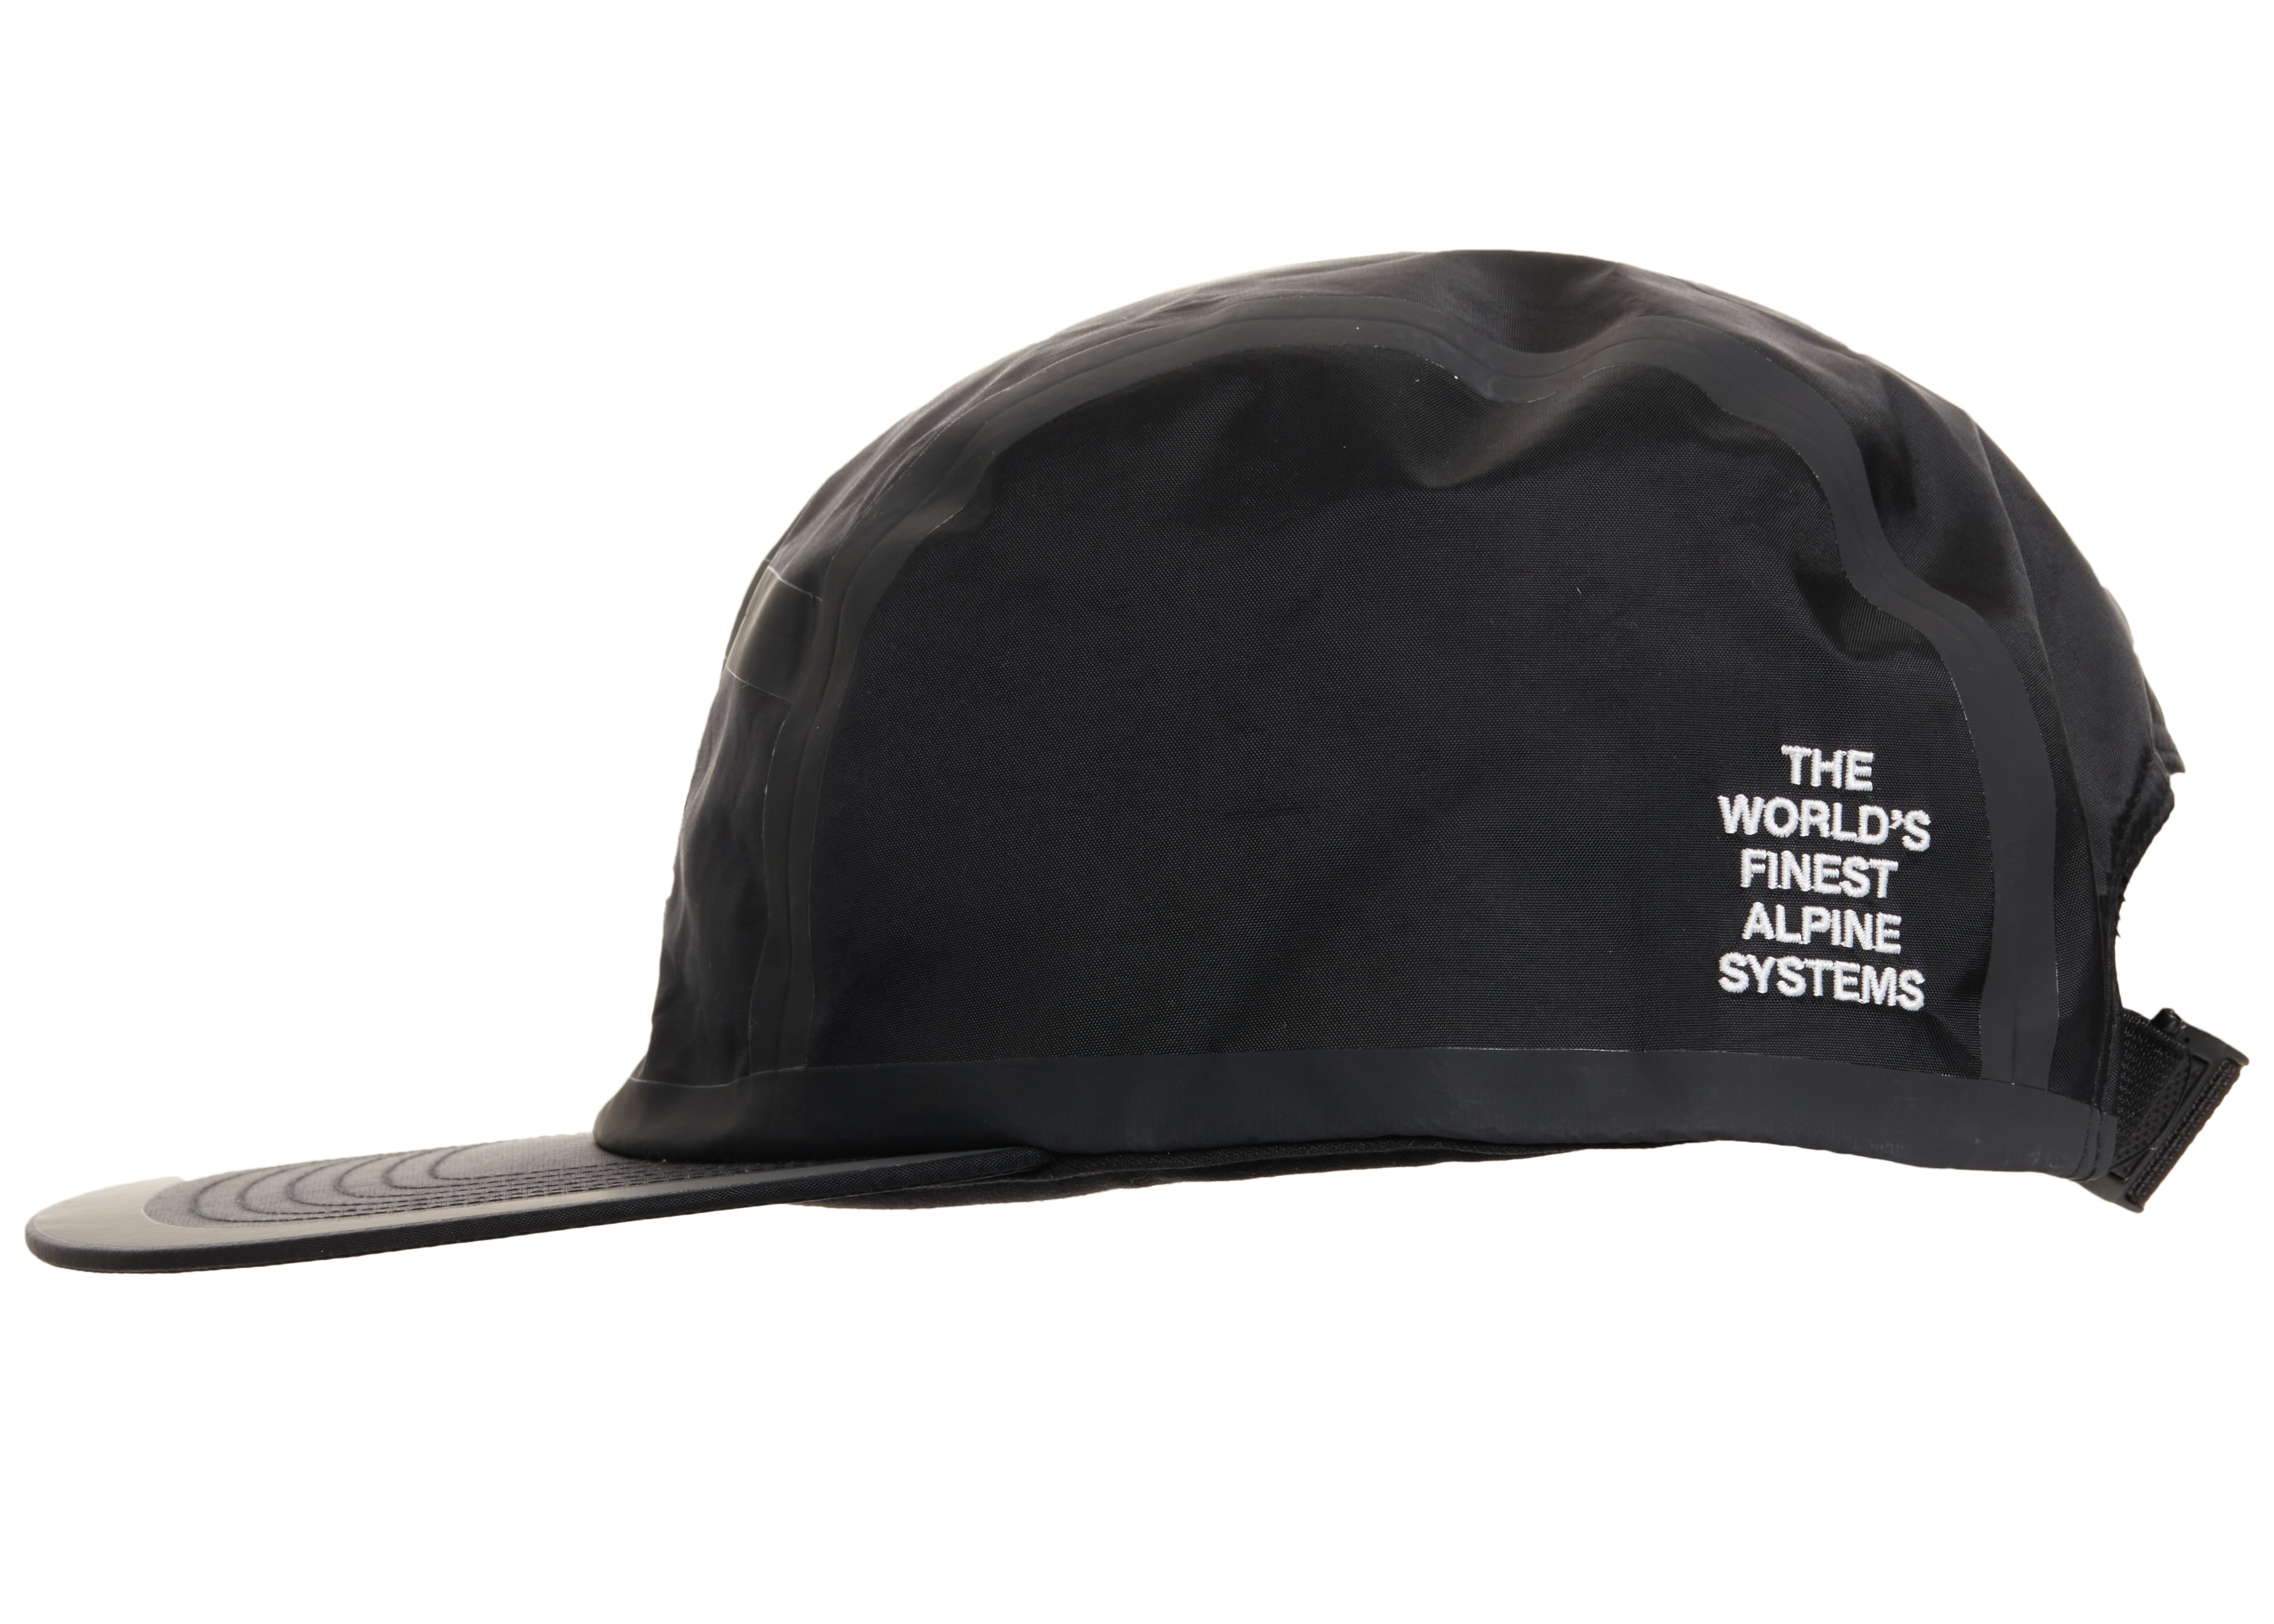 Supreme The North Face Summit Series Outer Tape Seam Camp Cap